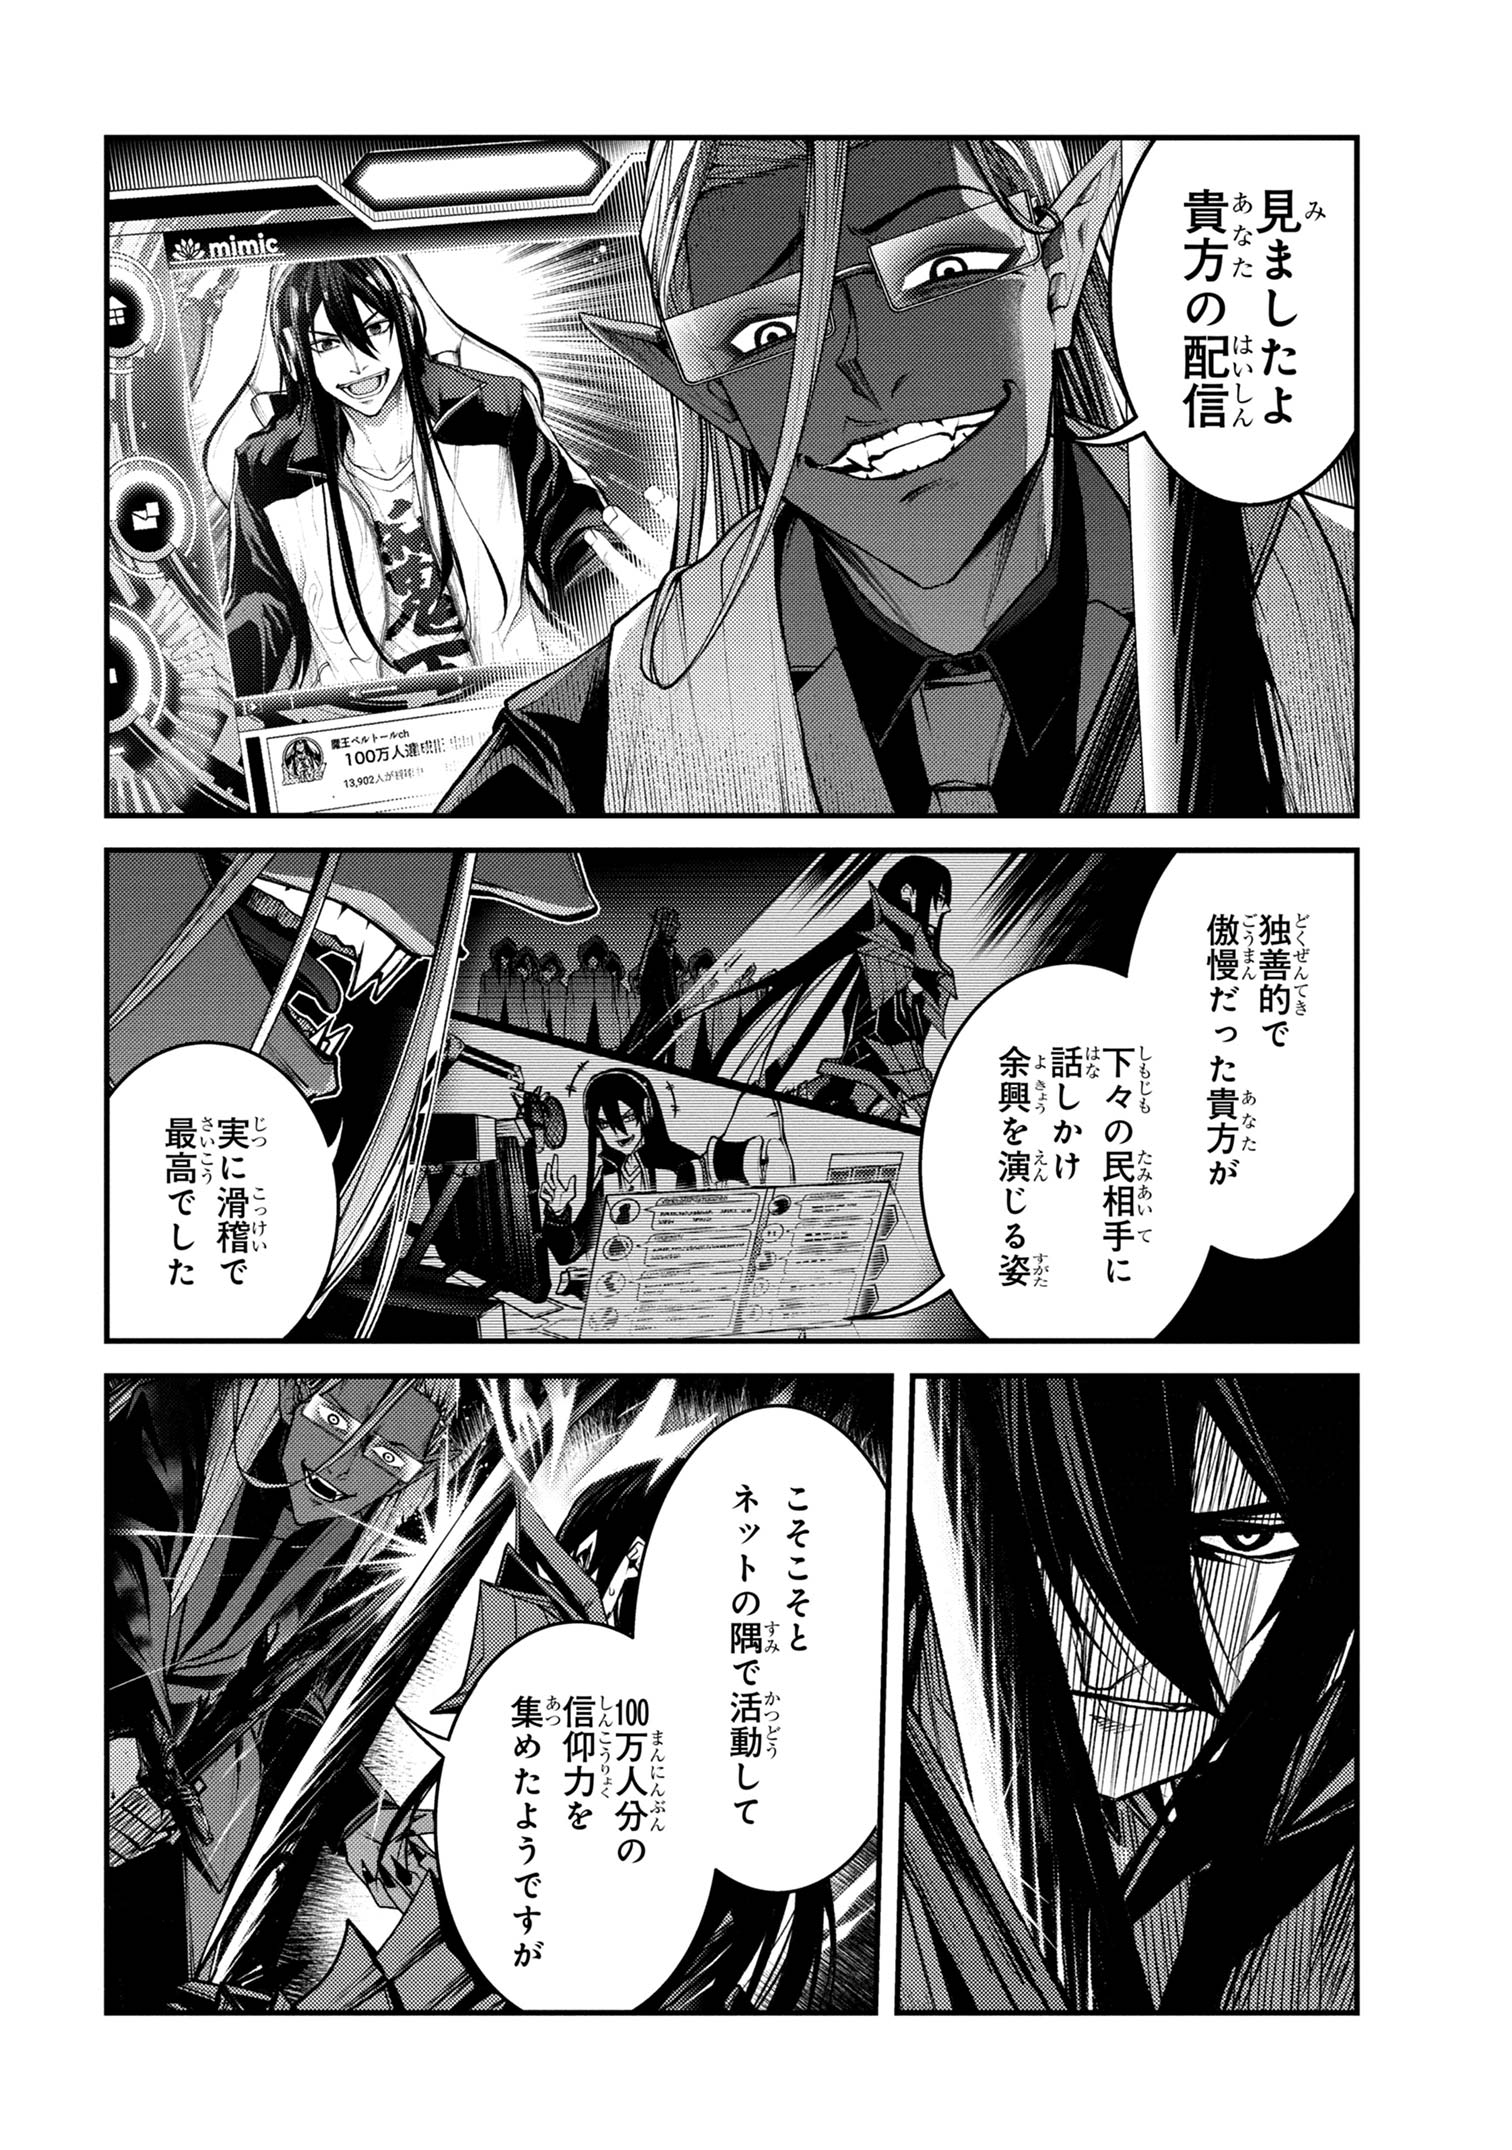 Maou 2099 - Chapter 11.1 - Page 10